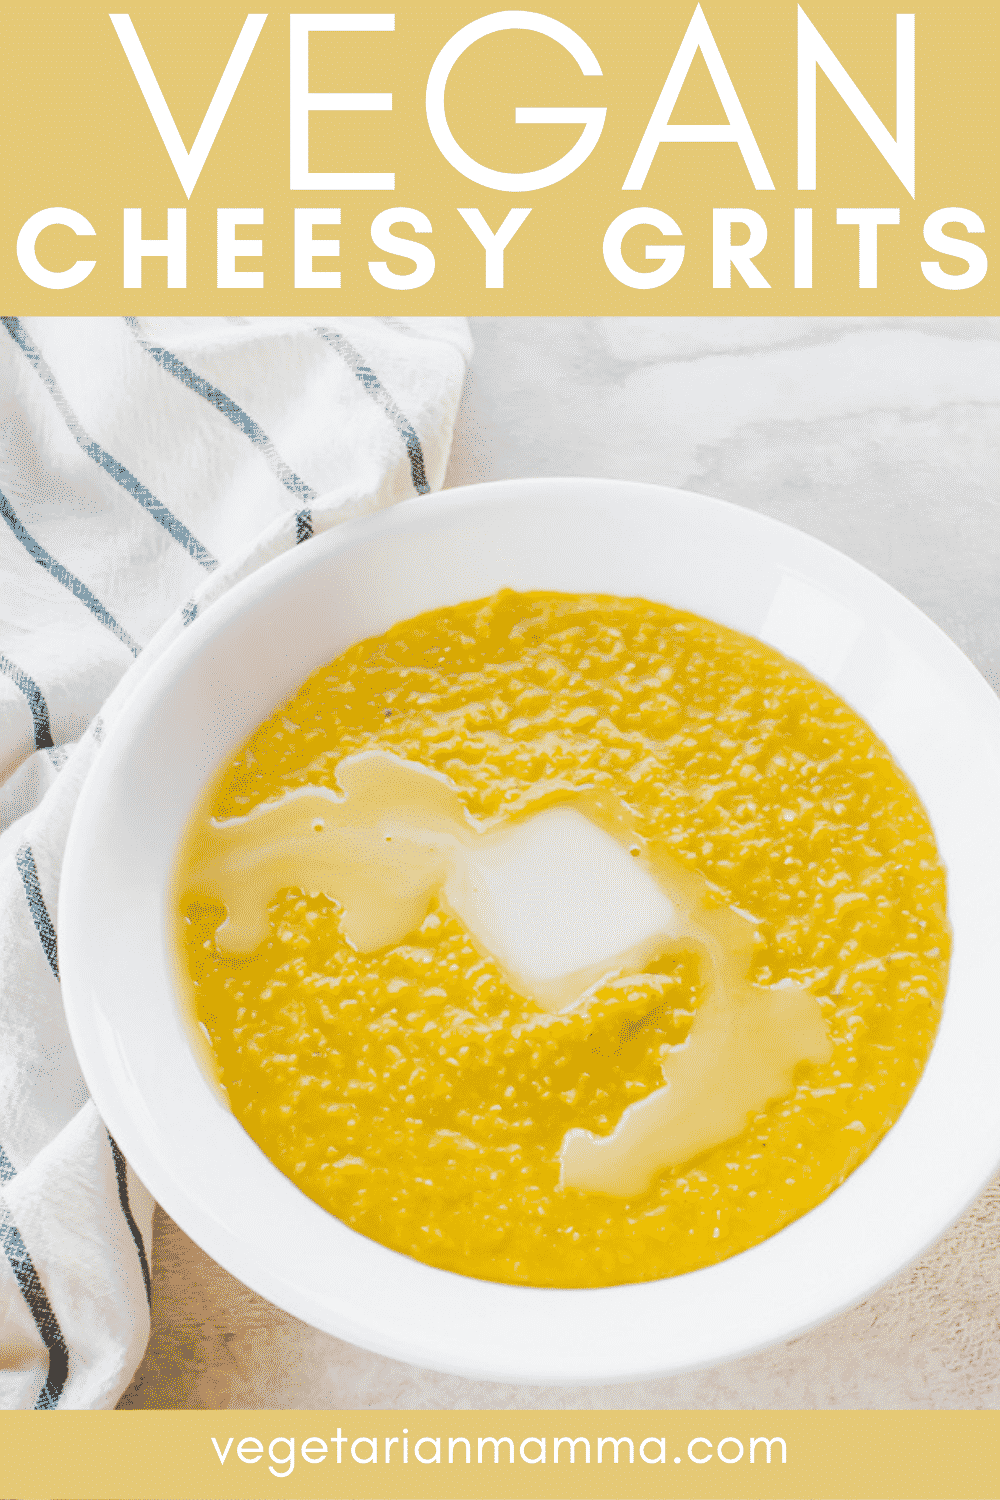 Vegan Grits are a super creamy side dish that's perfect for breakfast, lunch, or dinner! Dress up your next brunch with this 4-ingredient dish. #vegan #breakfast #brunch